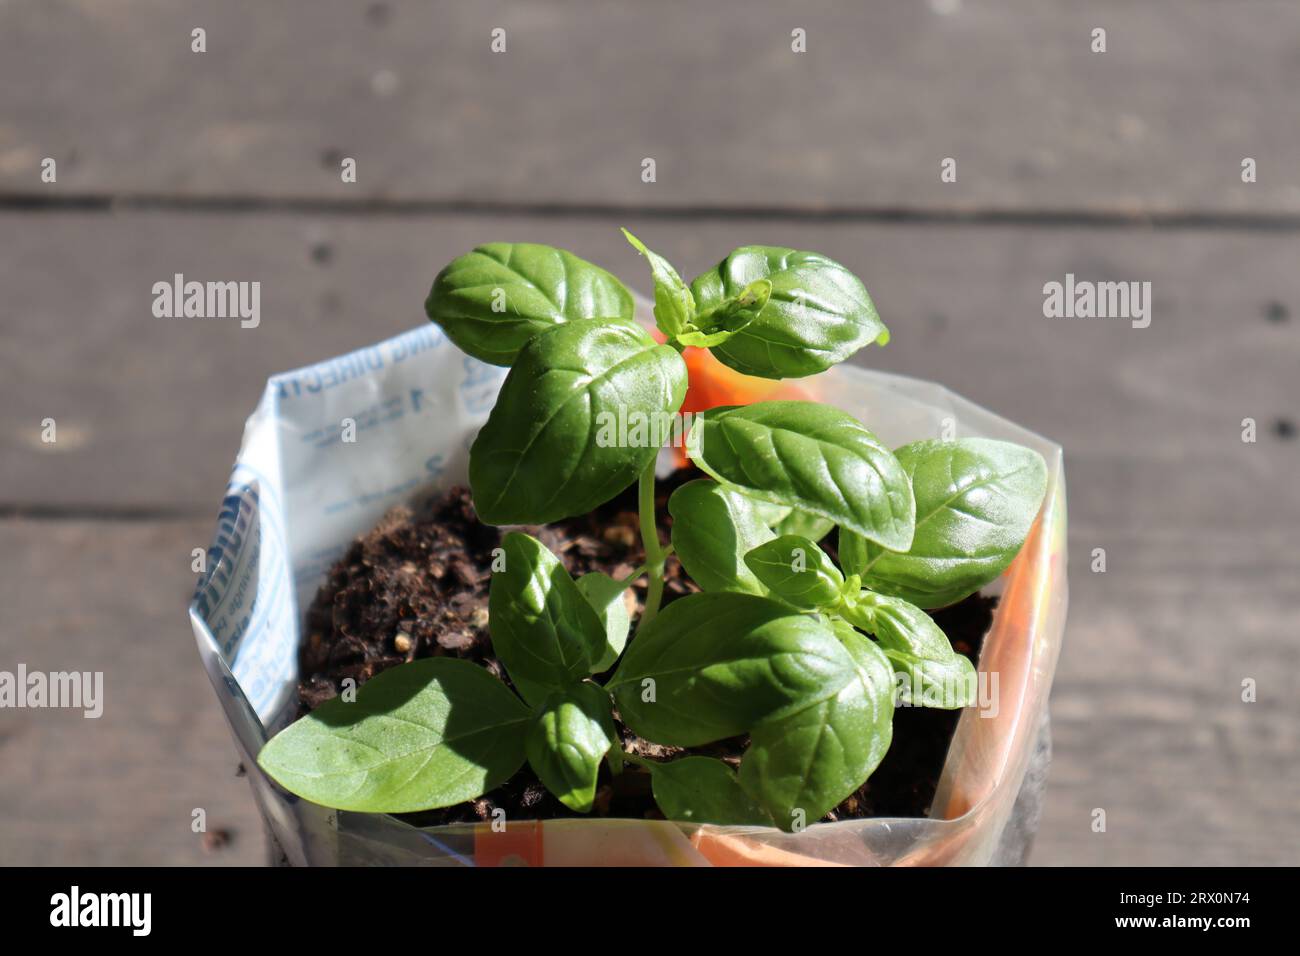 Basil plant seedlings growing in pot. Potted plants. Basil seedlings in recycled plastic bags. Recycled, reusable, recycling, zero waste concept. Stock Photo